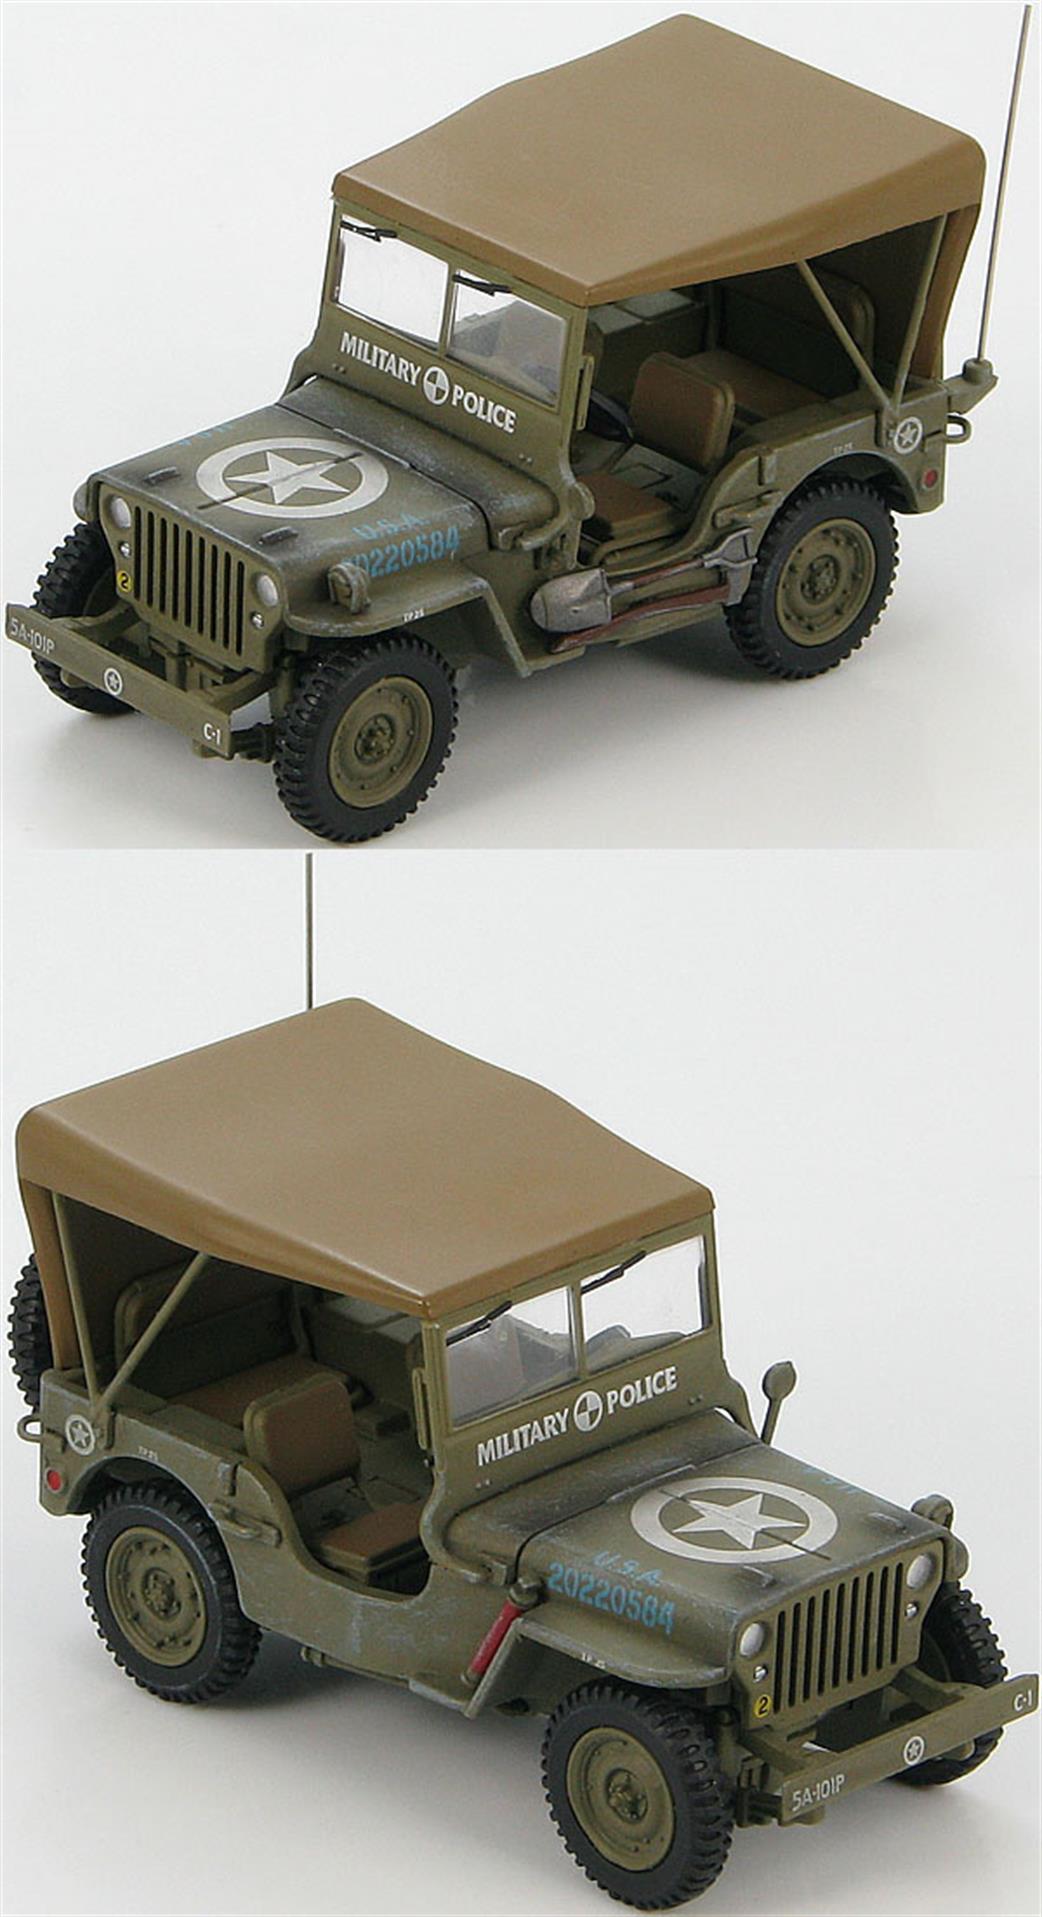 Hobby Master 1/48 HG1607 Willys Jeep MB 5th Army, 101st Military Police, Battalion C Company No.1, Italy 1945